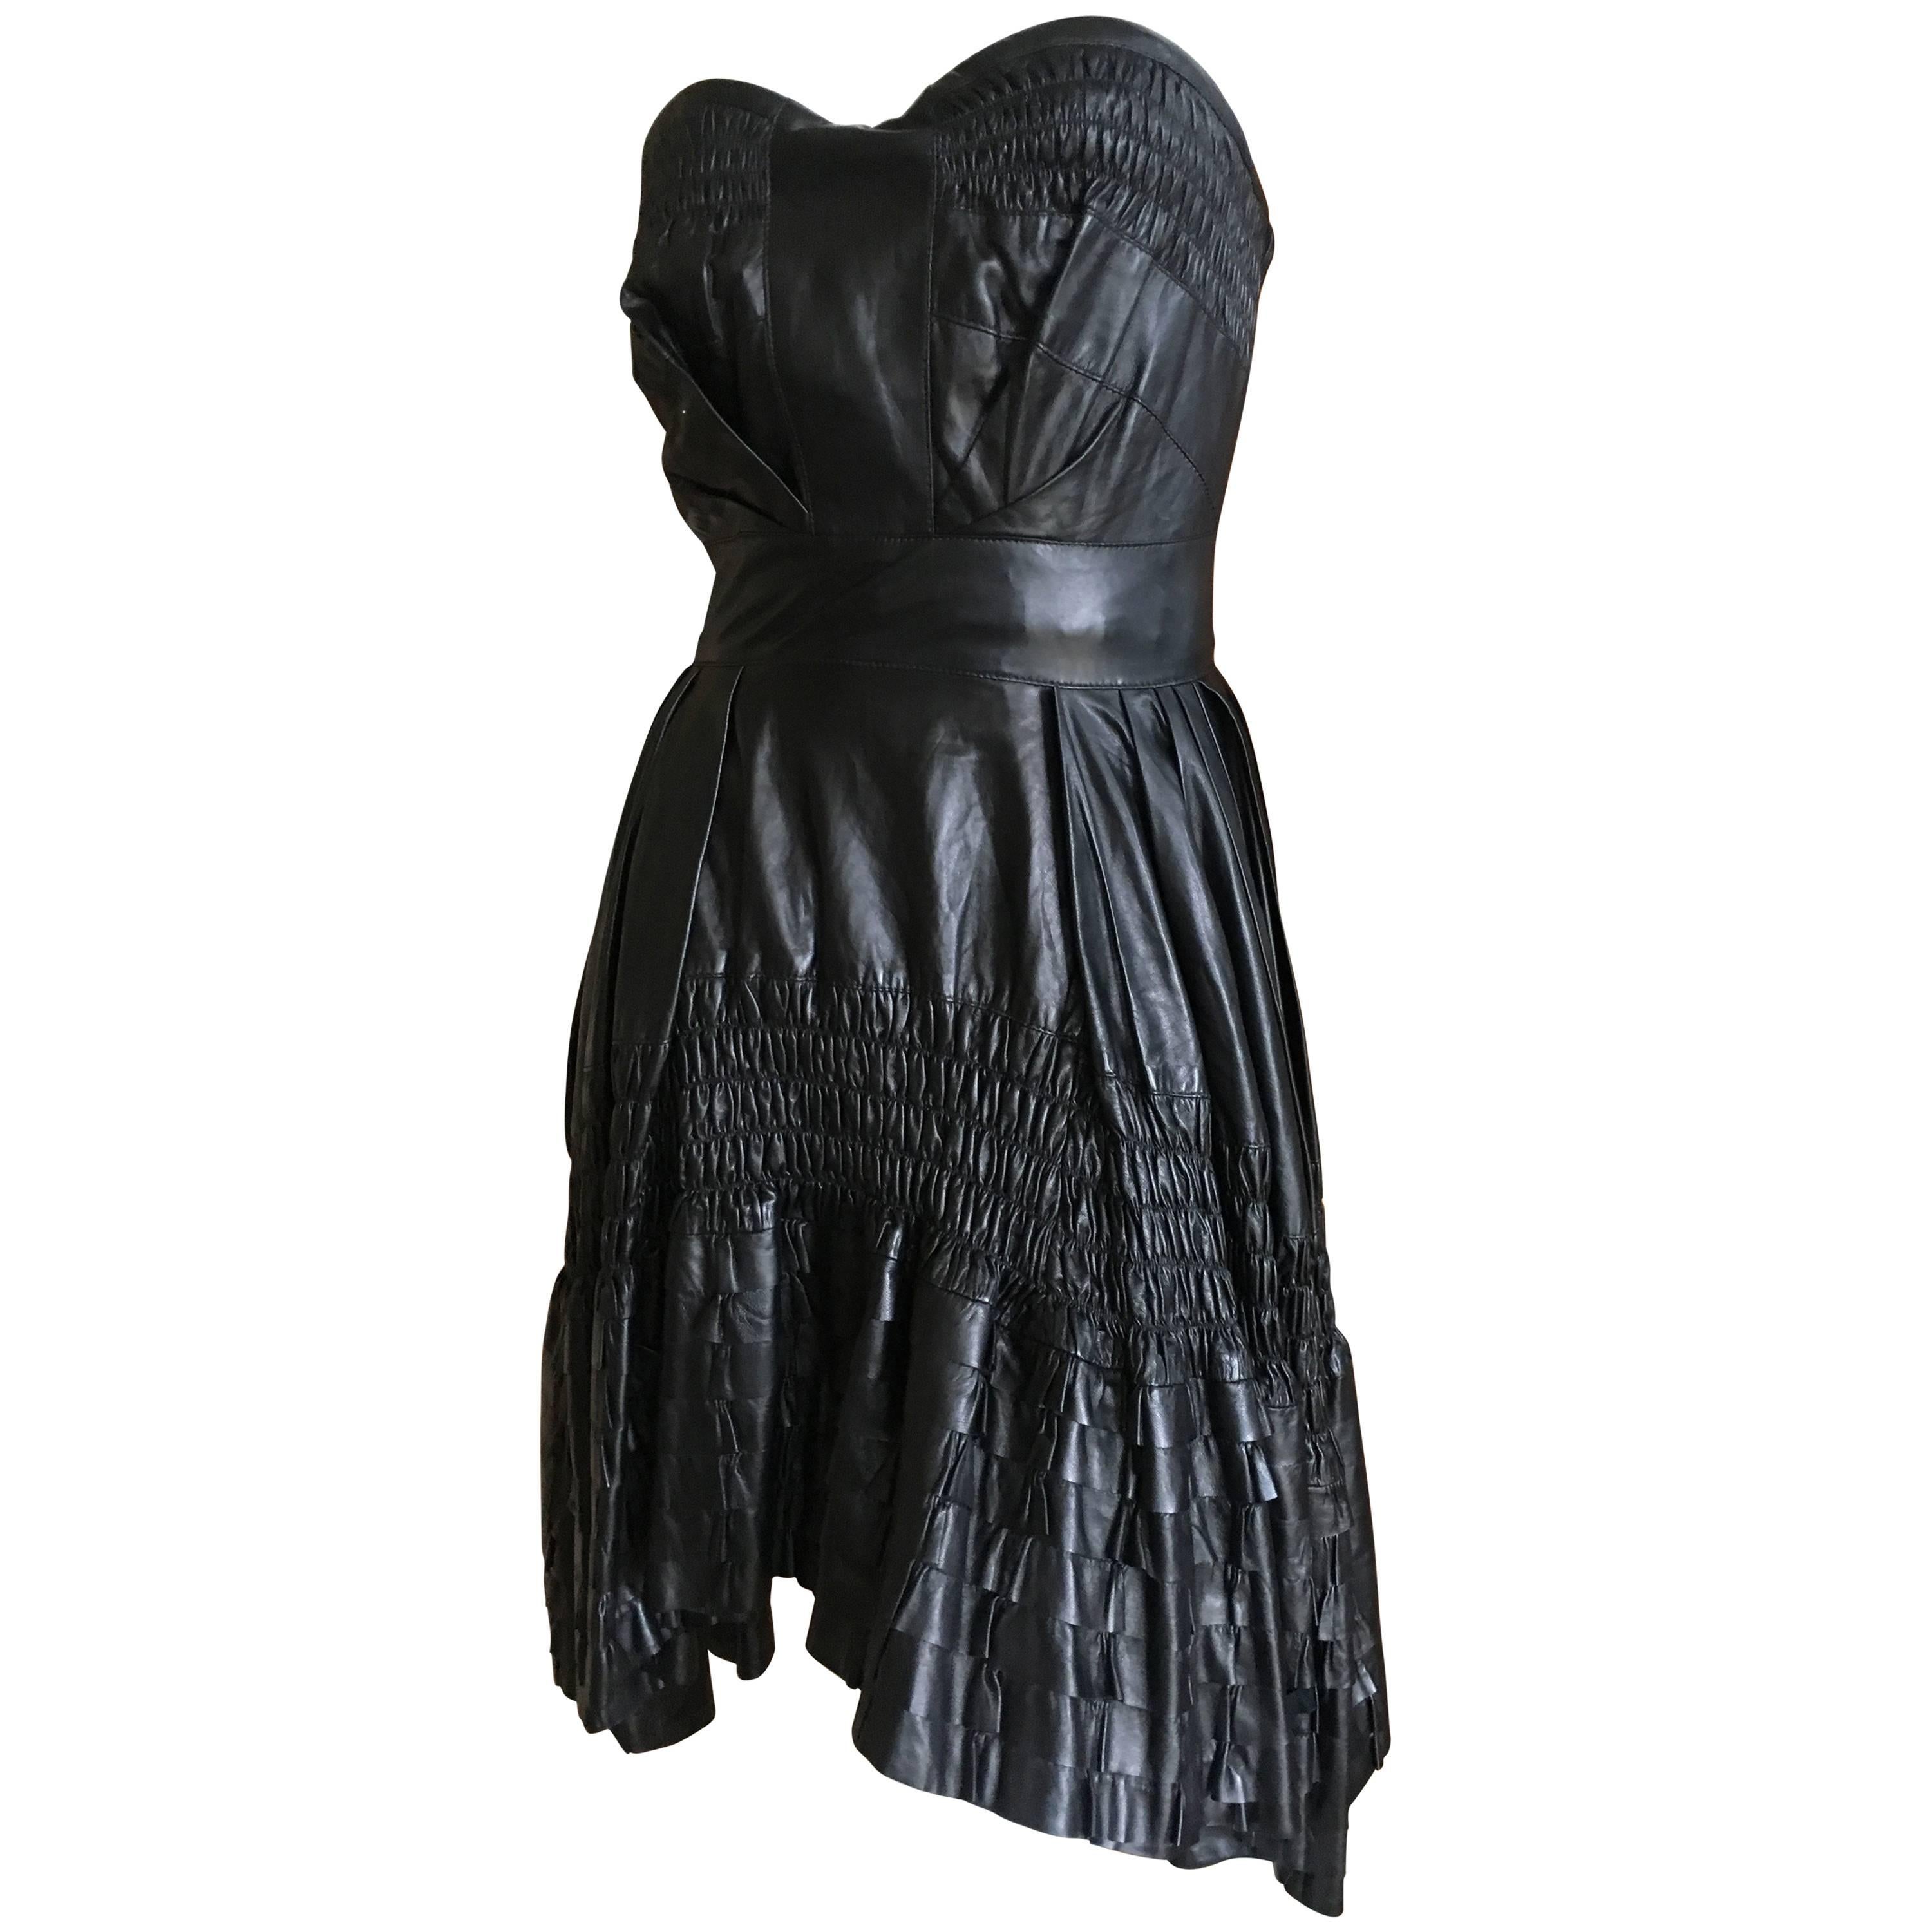 Christian Dior by John Galliano Fall 2010 Black Leather Pleated Ruffle Dress For Sale